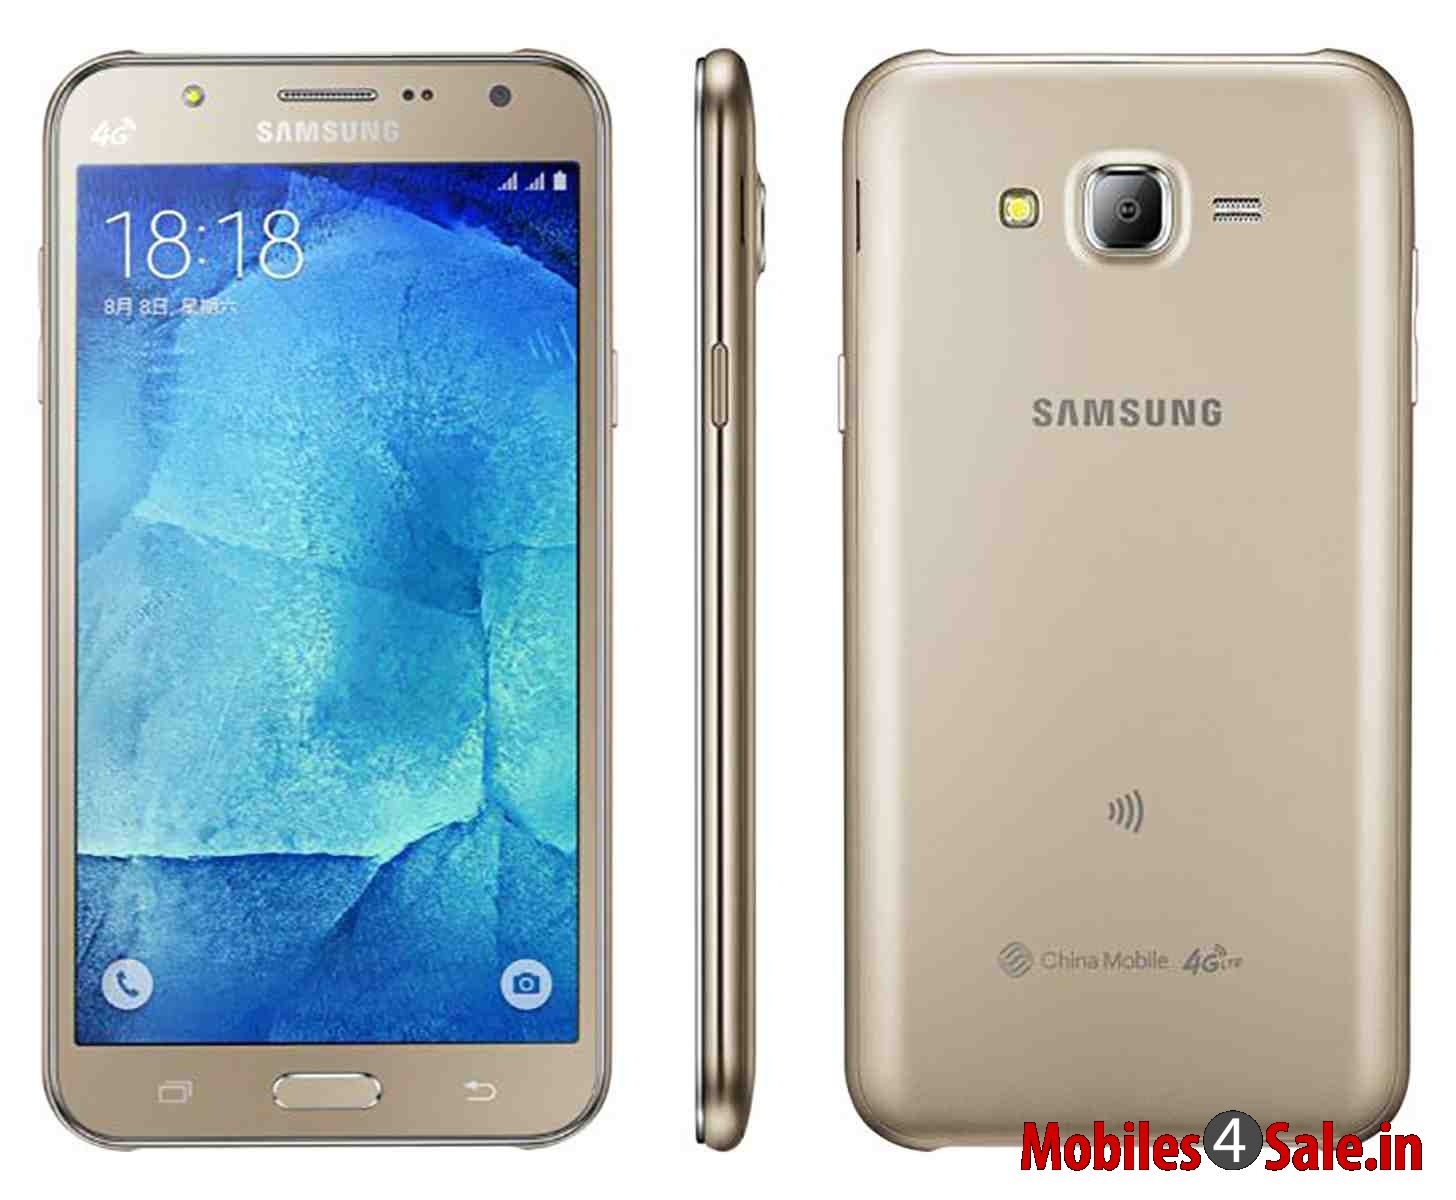 Samsung Galaxy J7 With 13 Mp Rear And 5 Mp Front Camera